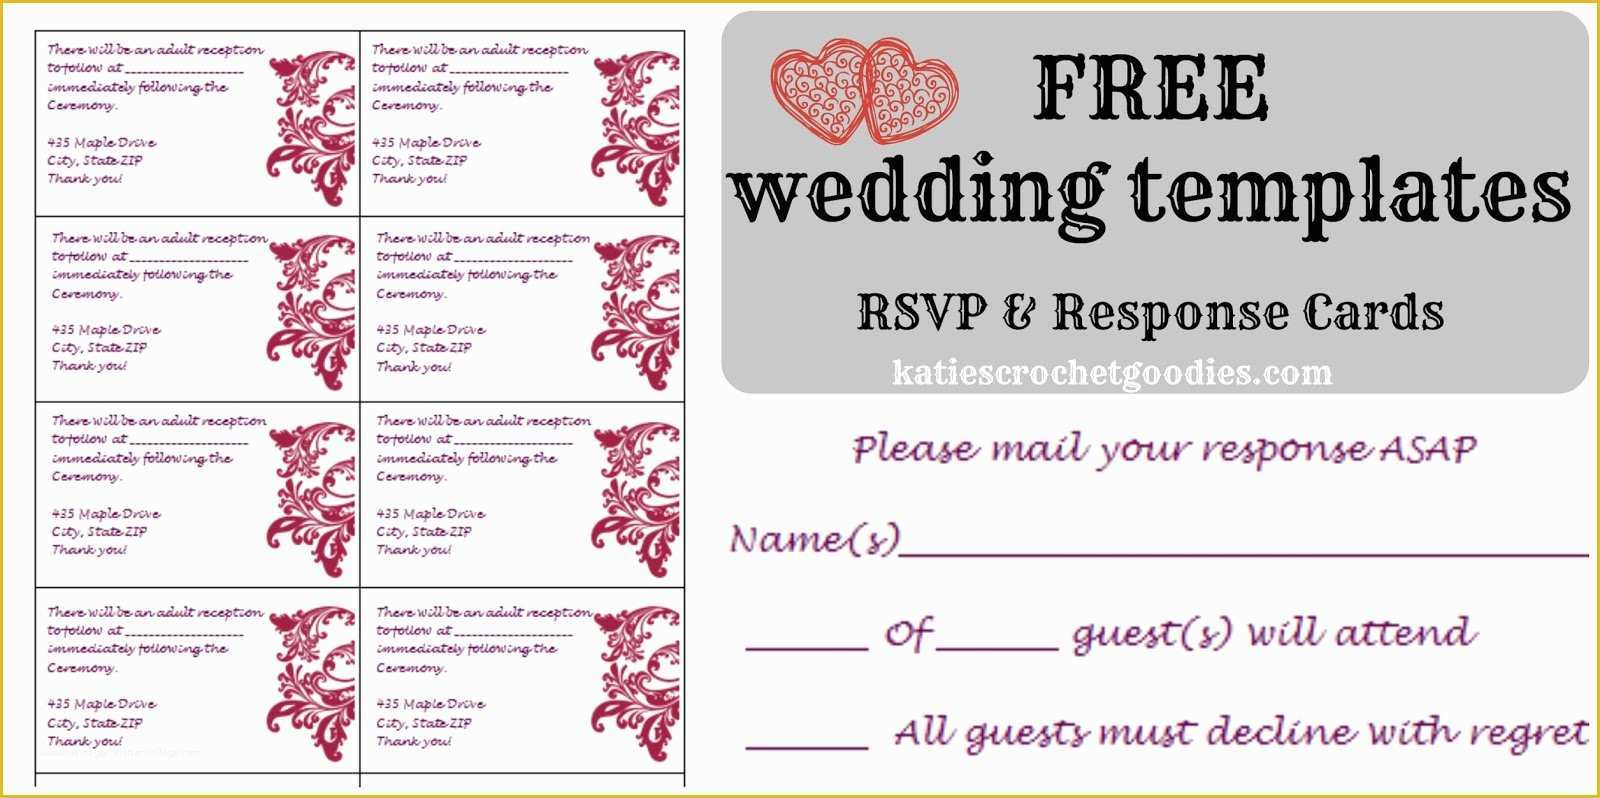 Free Rsvp Template Of Free Wedding Templates Rsvp & Reception Cards Katie S